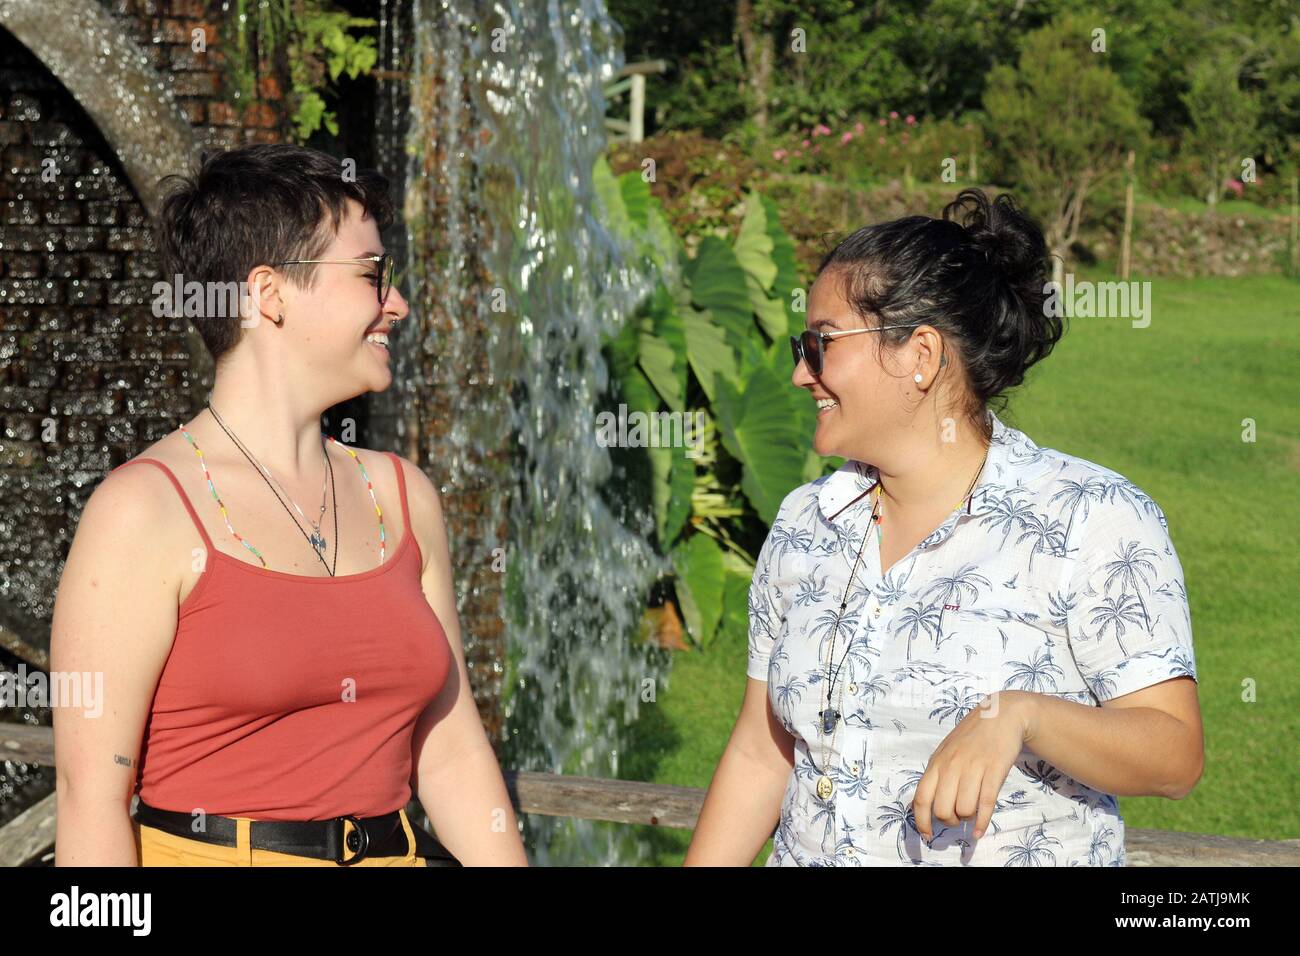 A happy conversation from the couple of homo-affective girls, a lot of happiness in a wonderful setting. Stock Photo